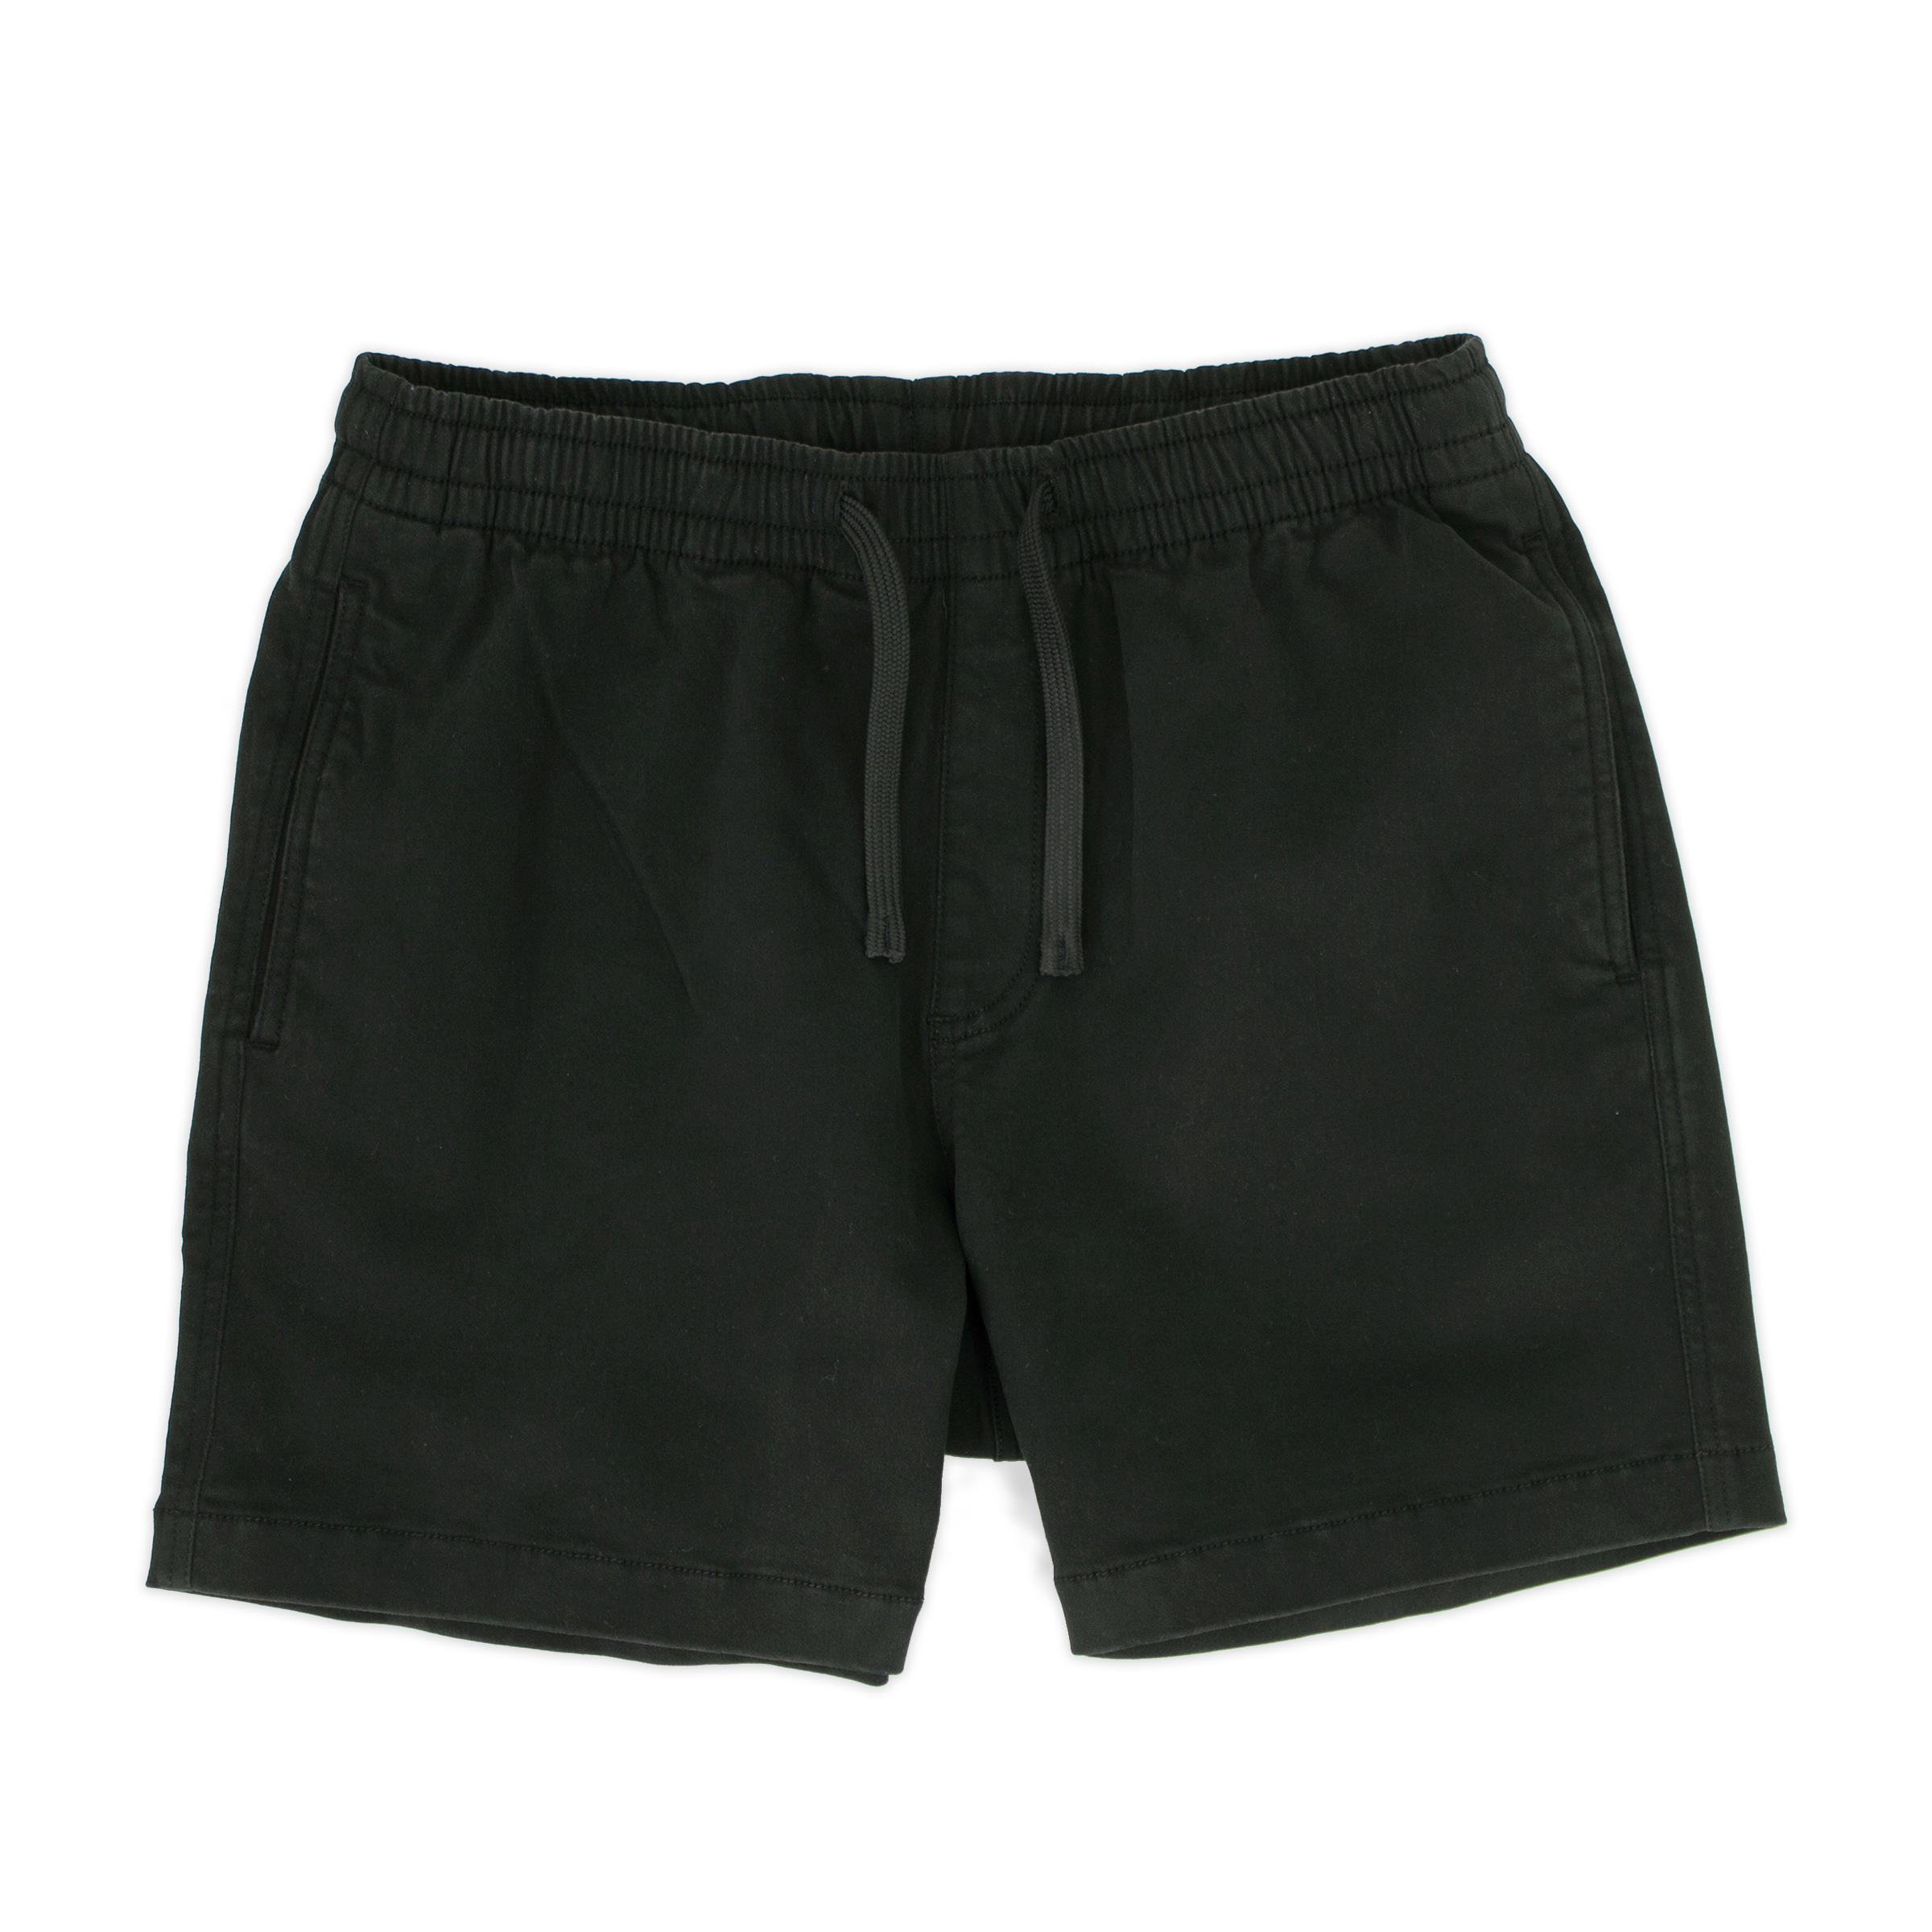 Alto Short 5.5" inseam in Black front with elastic waistband, fabric drawstring, faux fly, and two front side seam pockets